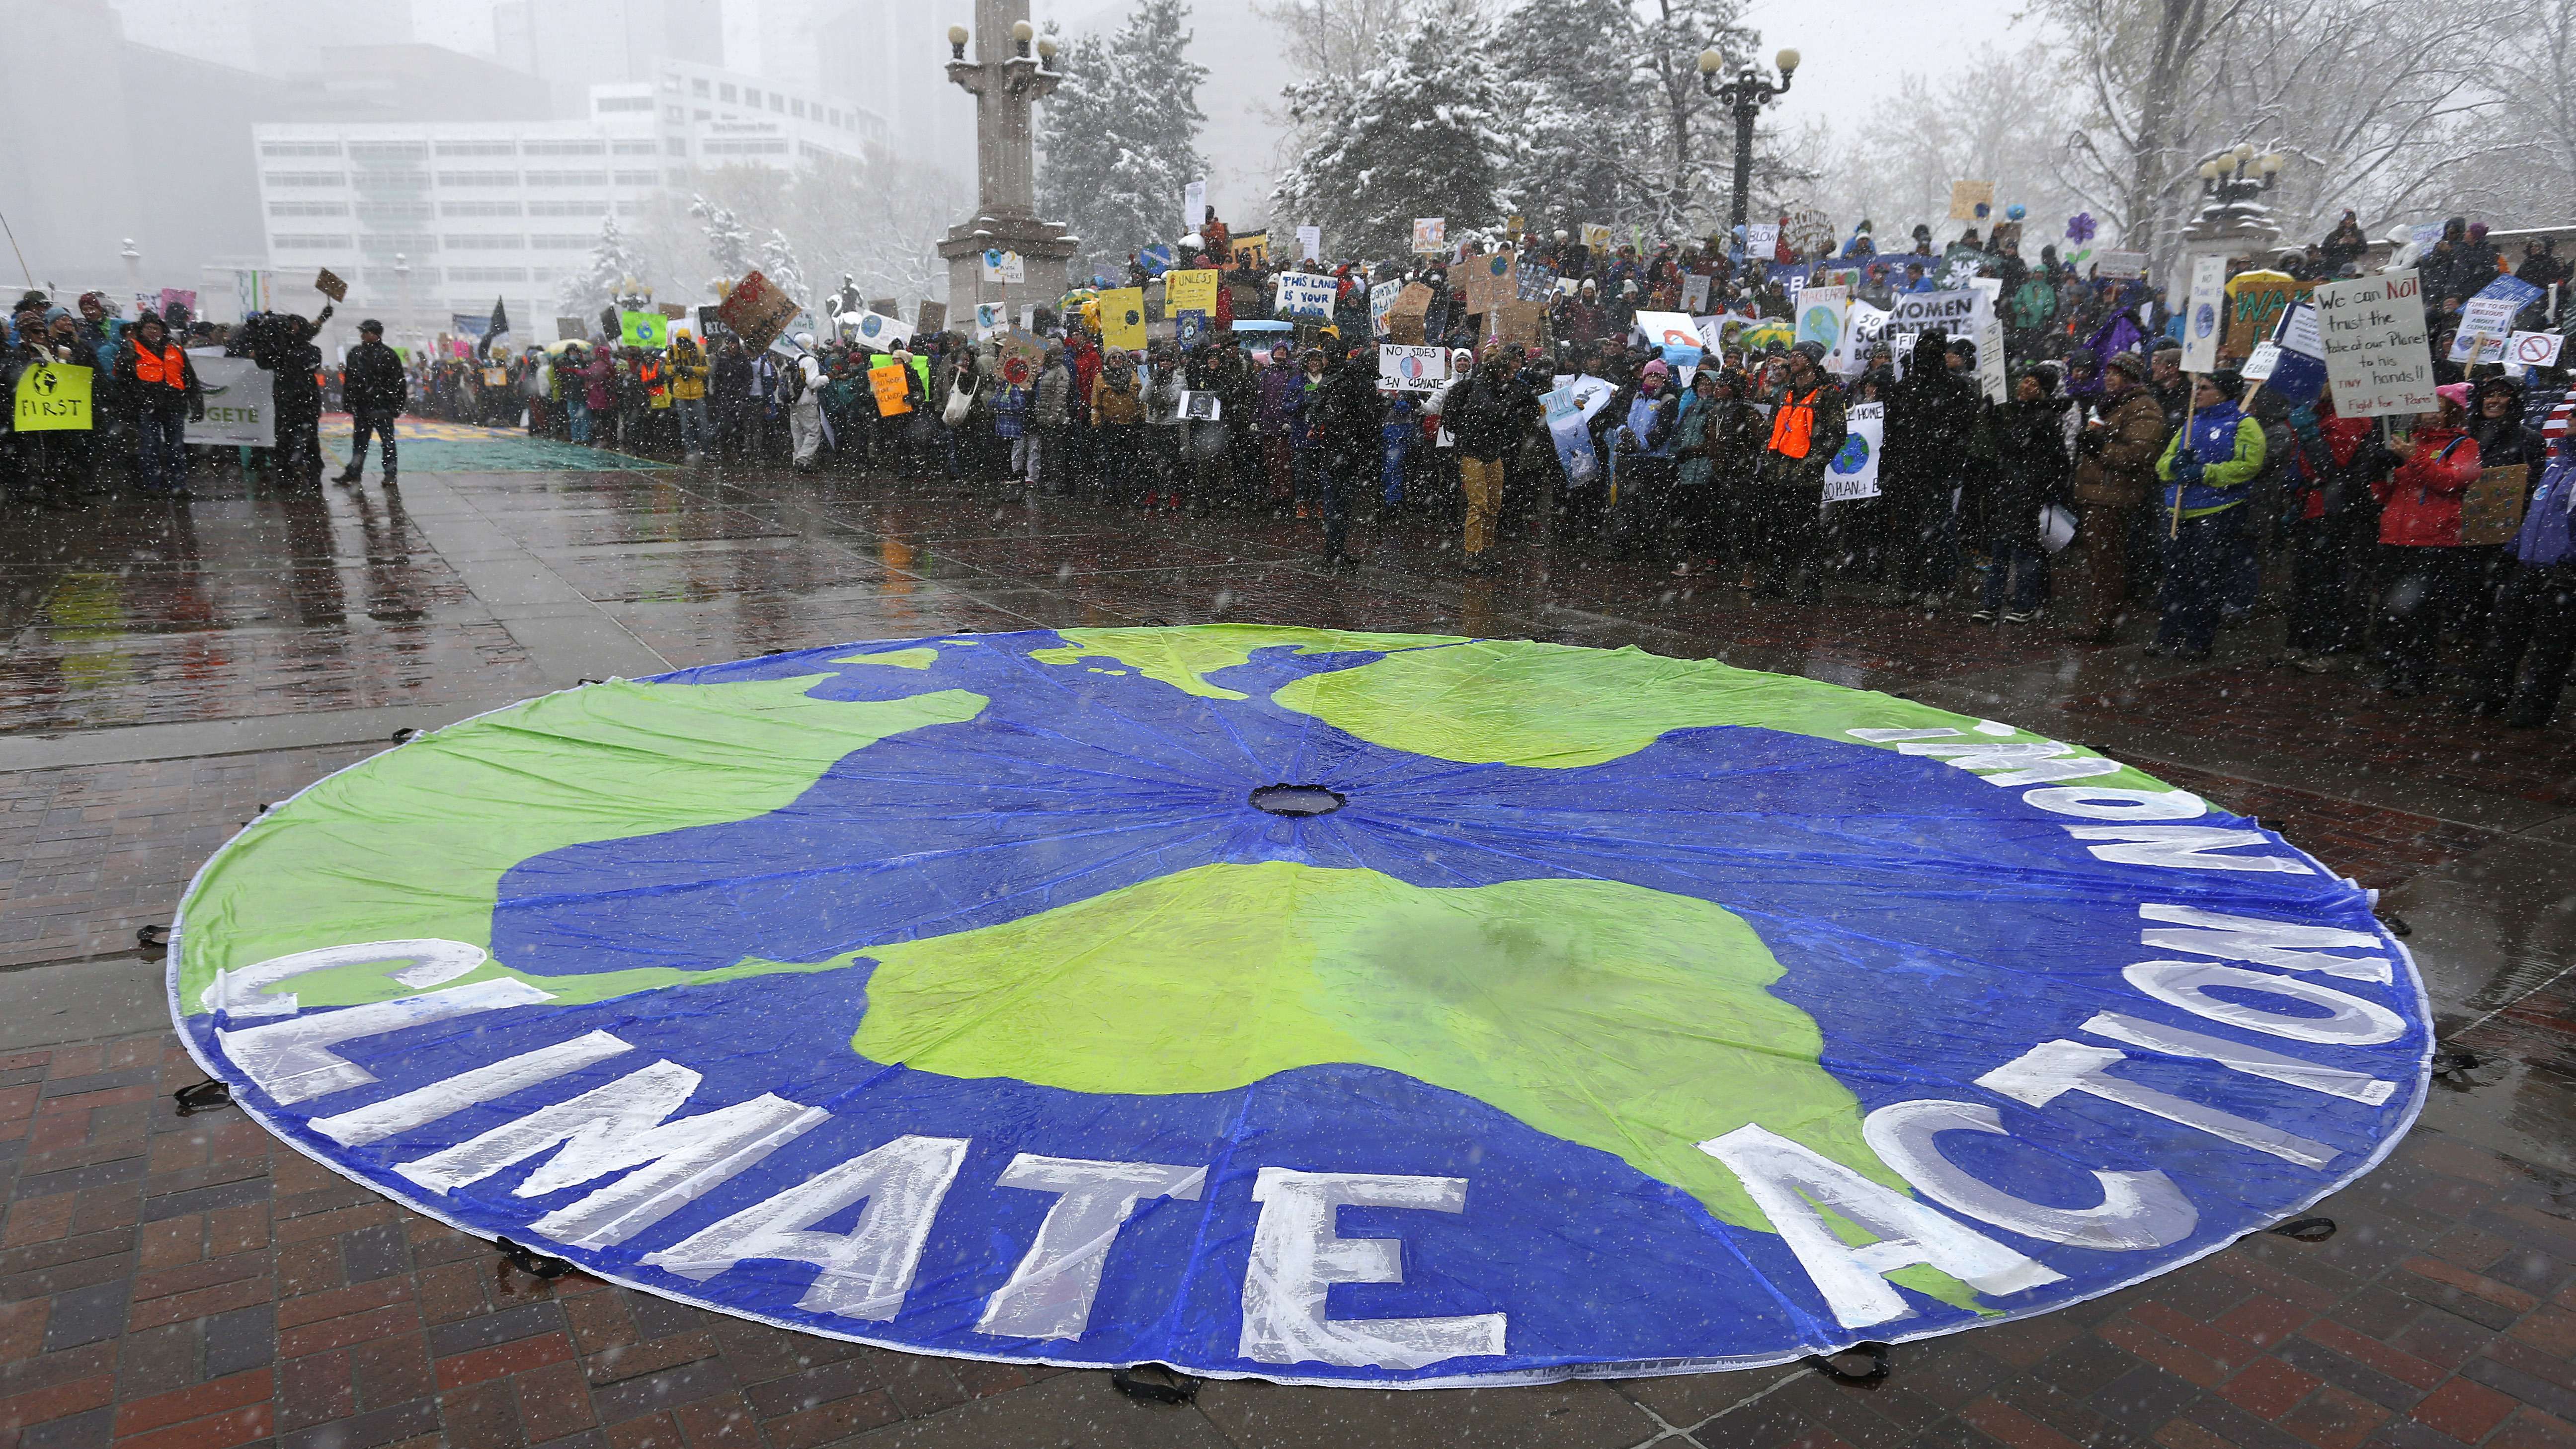 Participants chant during a climate change awareness rally, in Denver, Saturday, April 29, 2017. The gathering was among many others of its kind held nationwide marking President Donald Trump's 100th day in office. Photo: AP